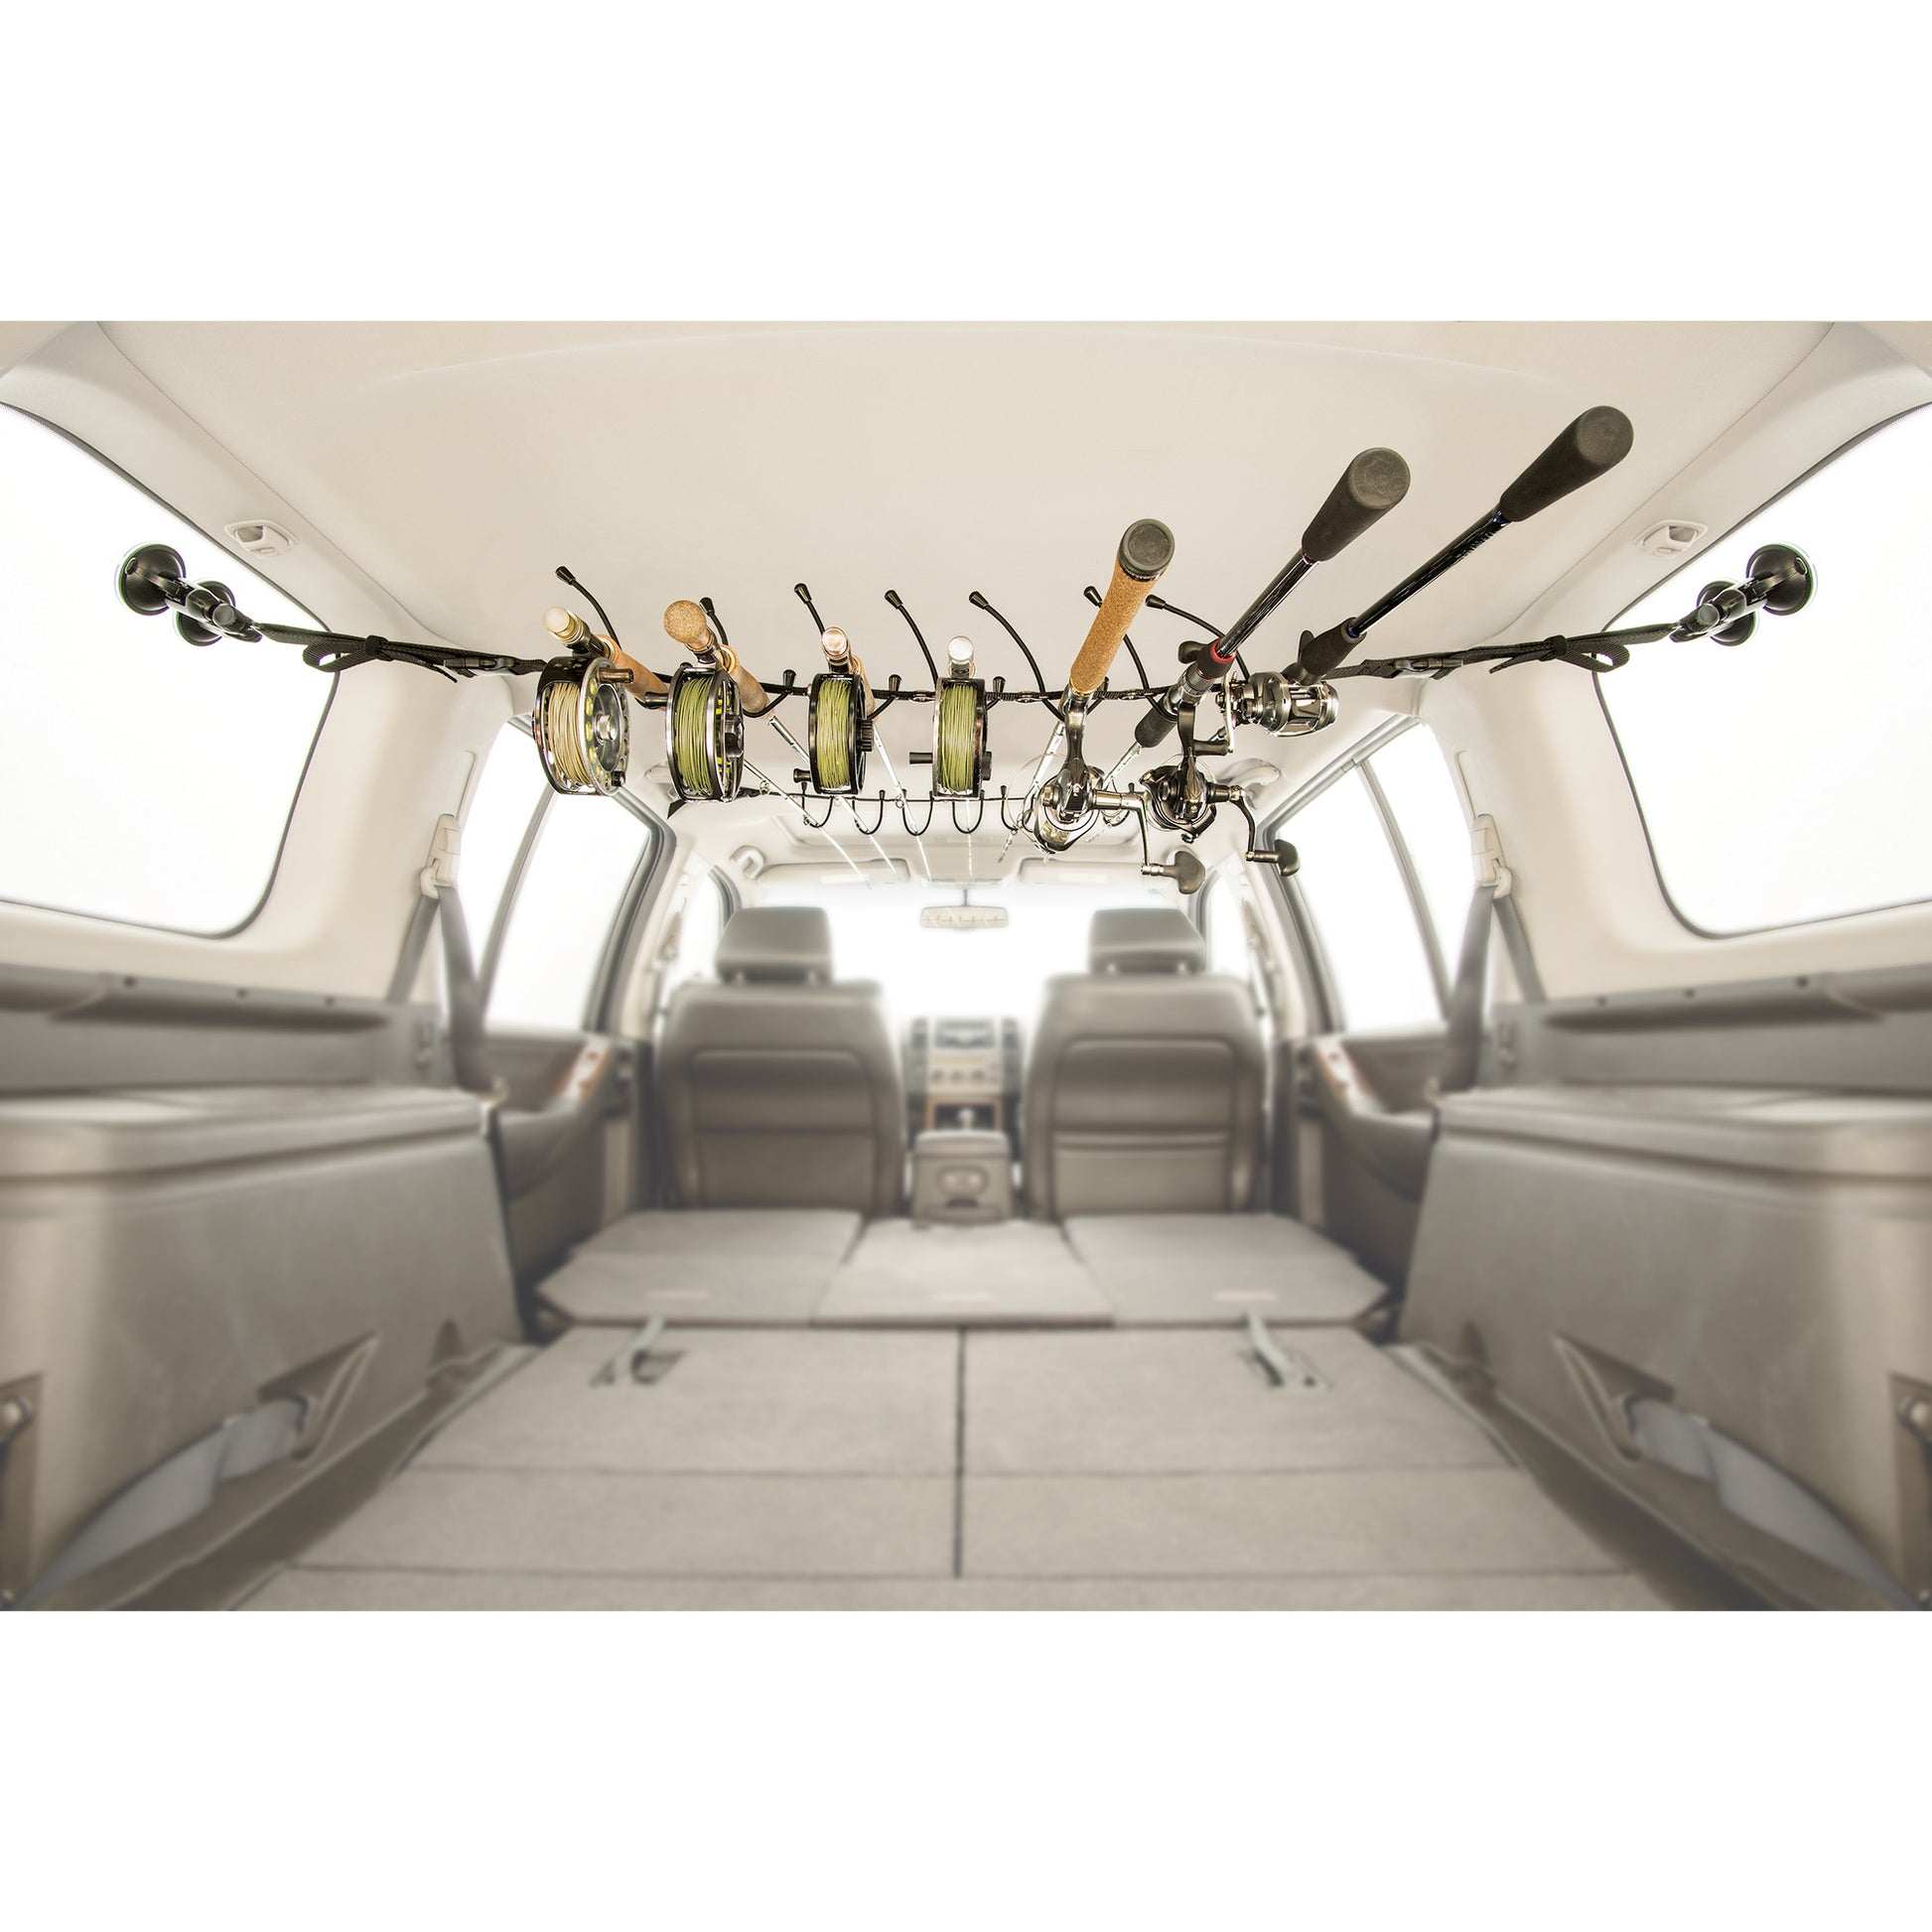 Fishing Rod Holder, Multi-Functional for Your Vehicle.